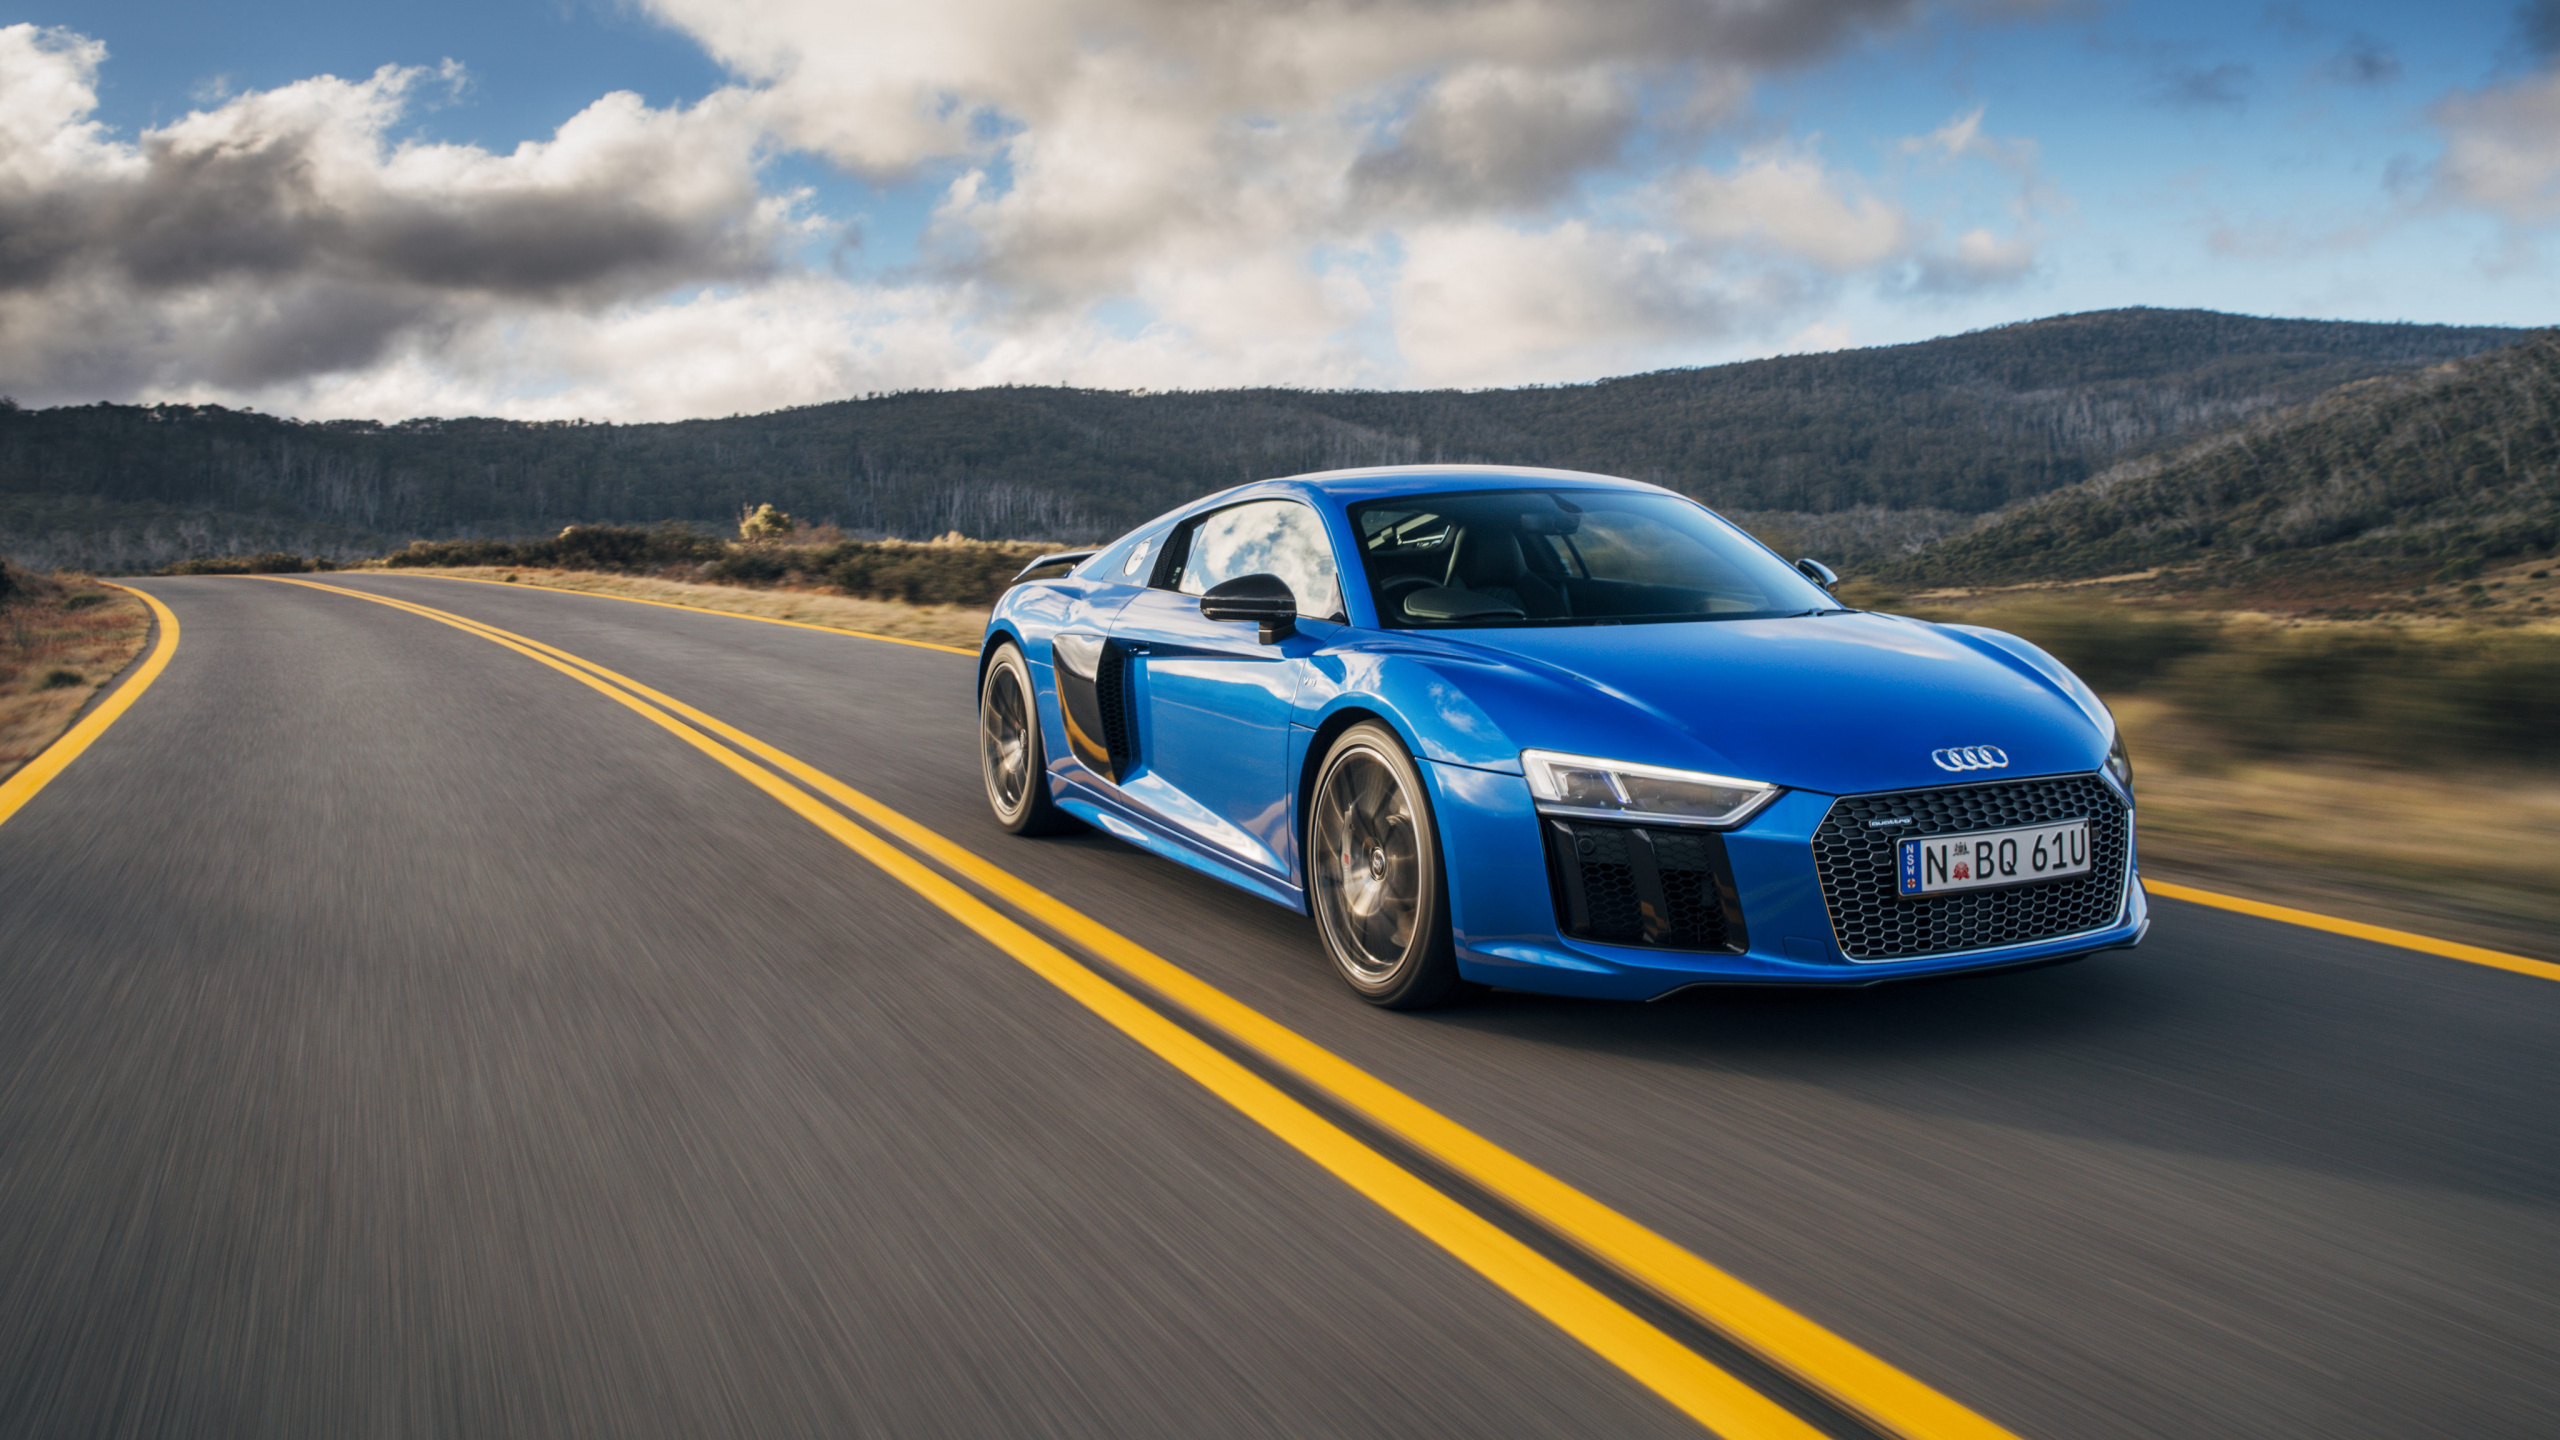 Blue Audi Coupe on Road During Daytime. Wallpaper in 2560x1440 Resolution